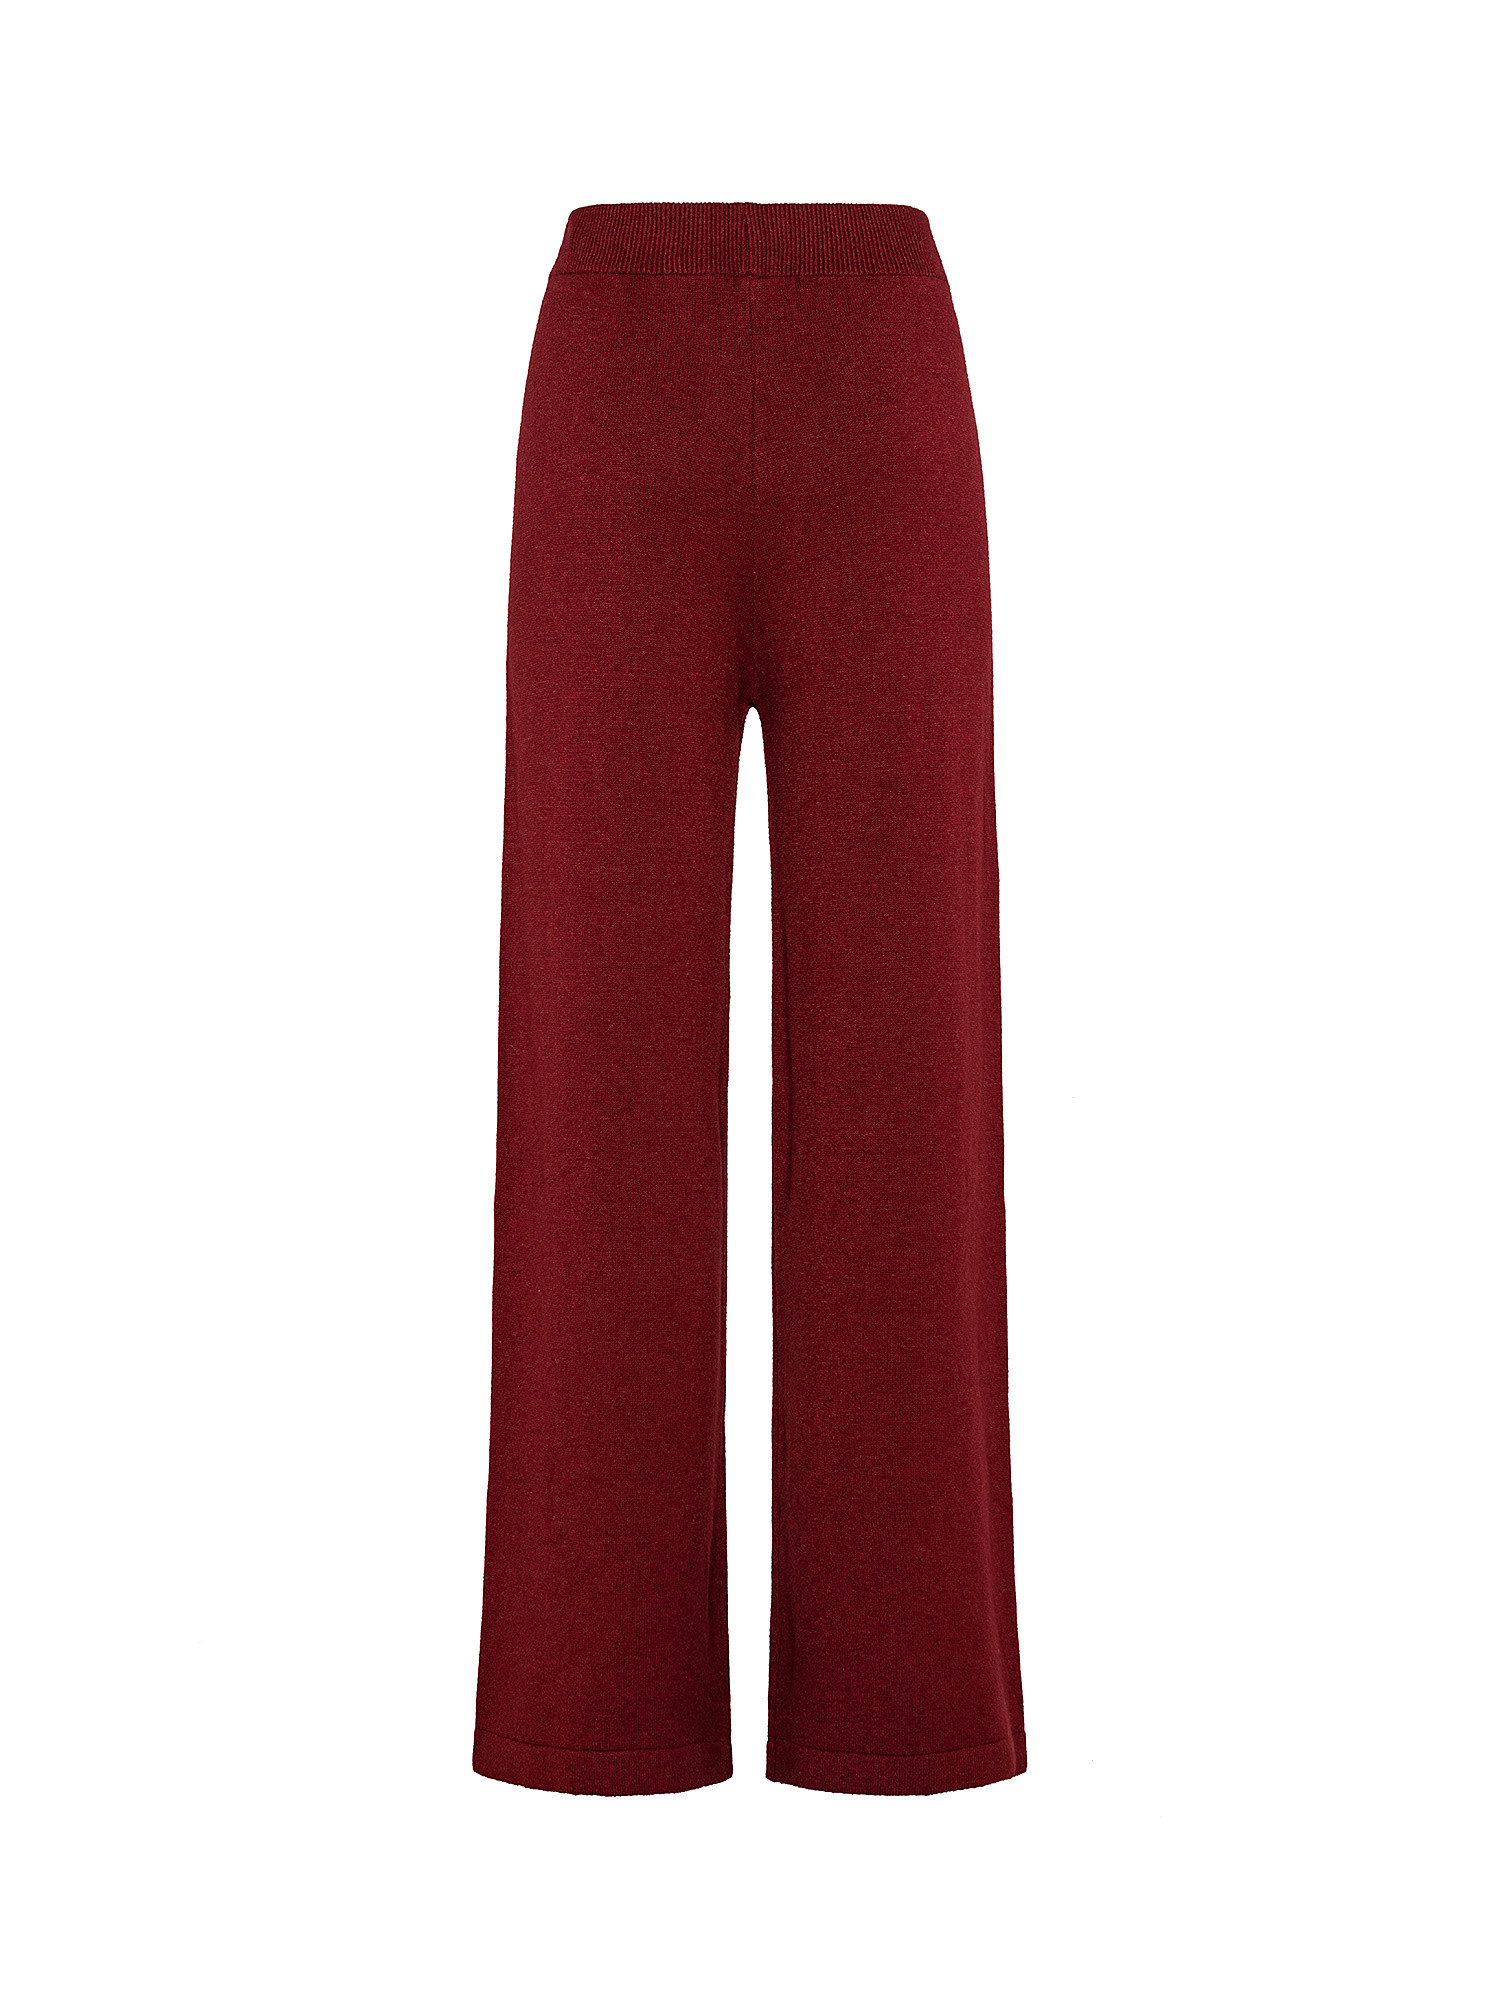 Wide leg knitted trousers, Dark Red, large image number 1